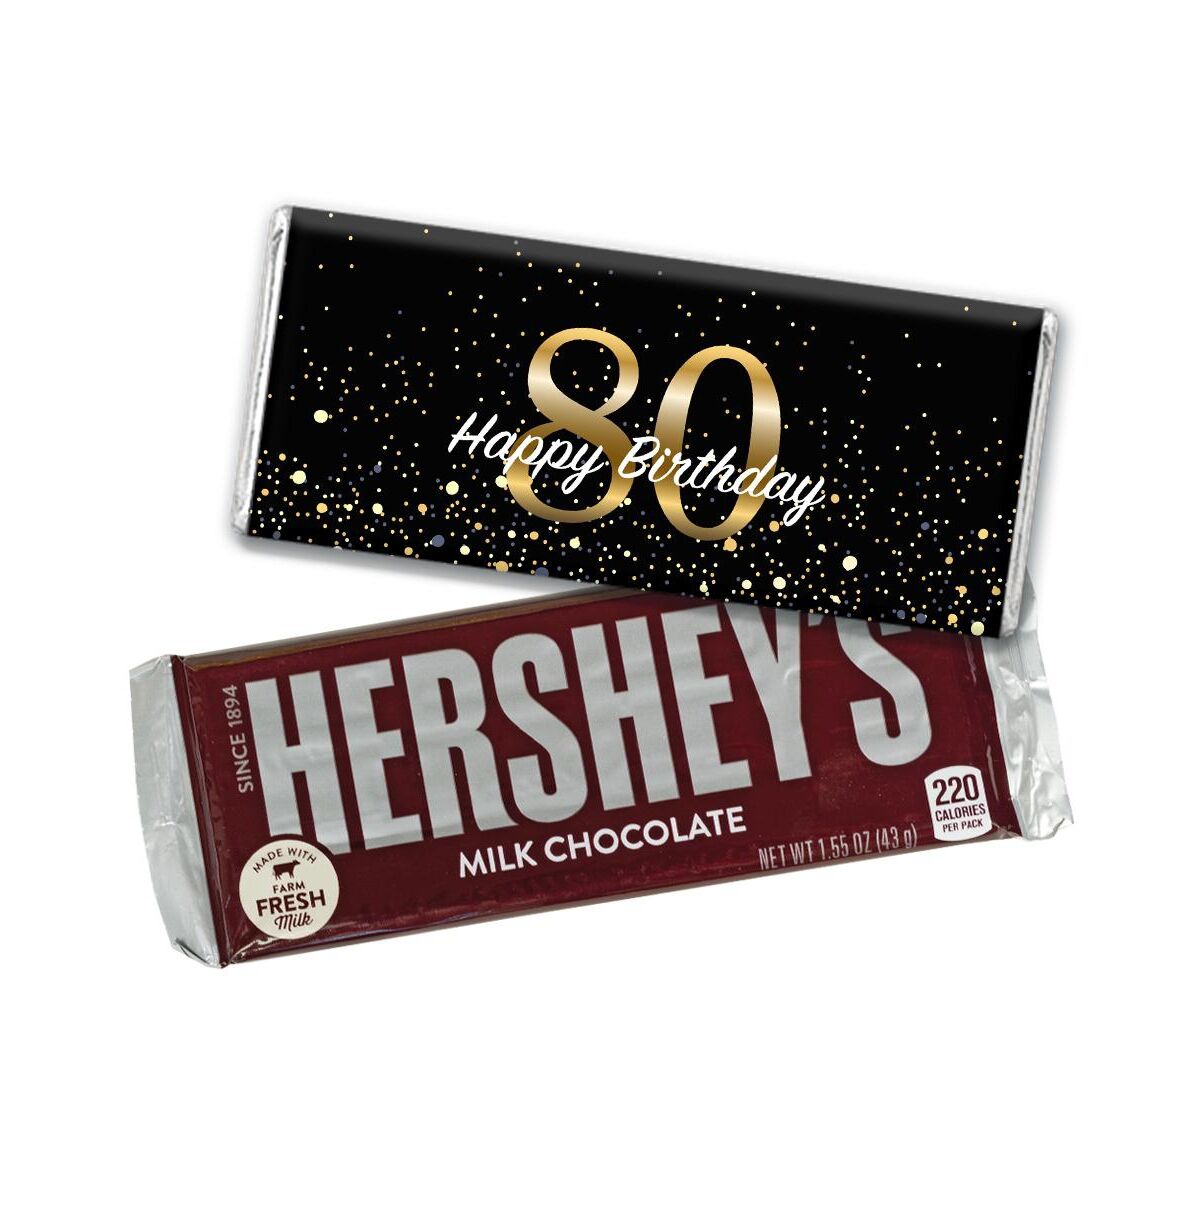 Candy 36ct 80th Birthday Candy Party Favors Wrapped Hershey's Chocolate Bars by Just Candy (36 Pack) - Candy Included - Assorted pre-pack